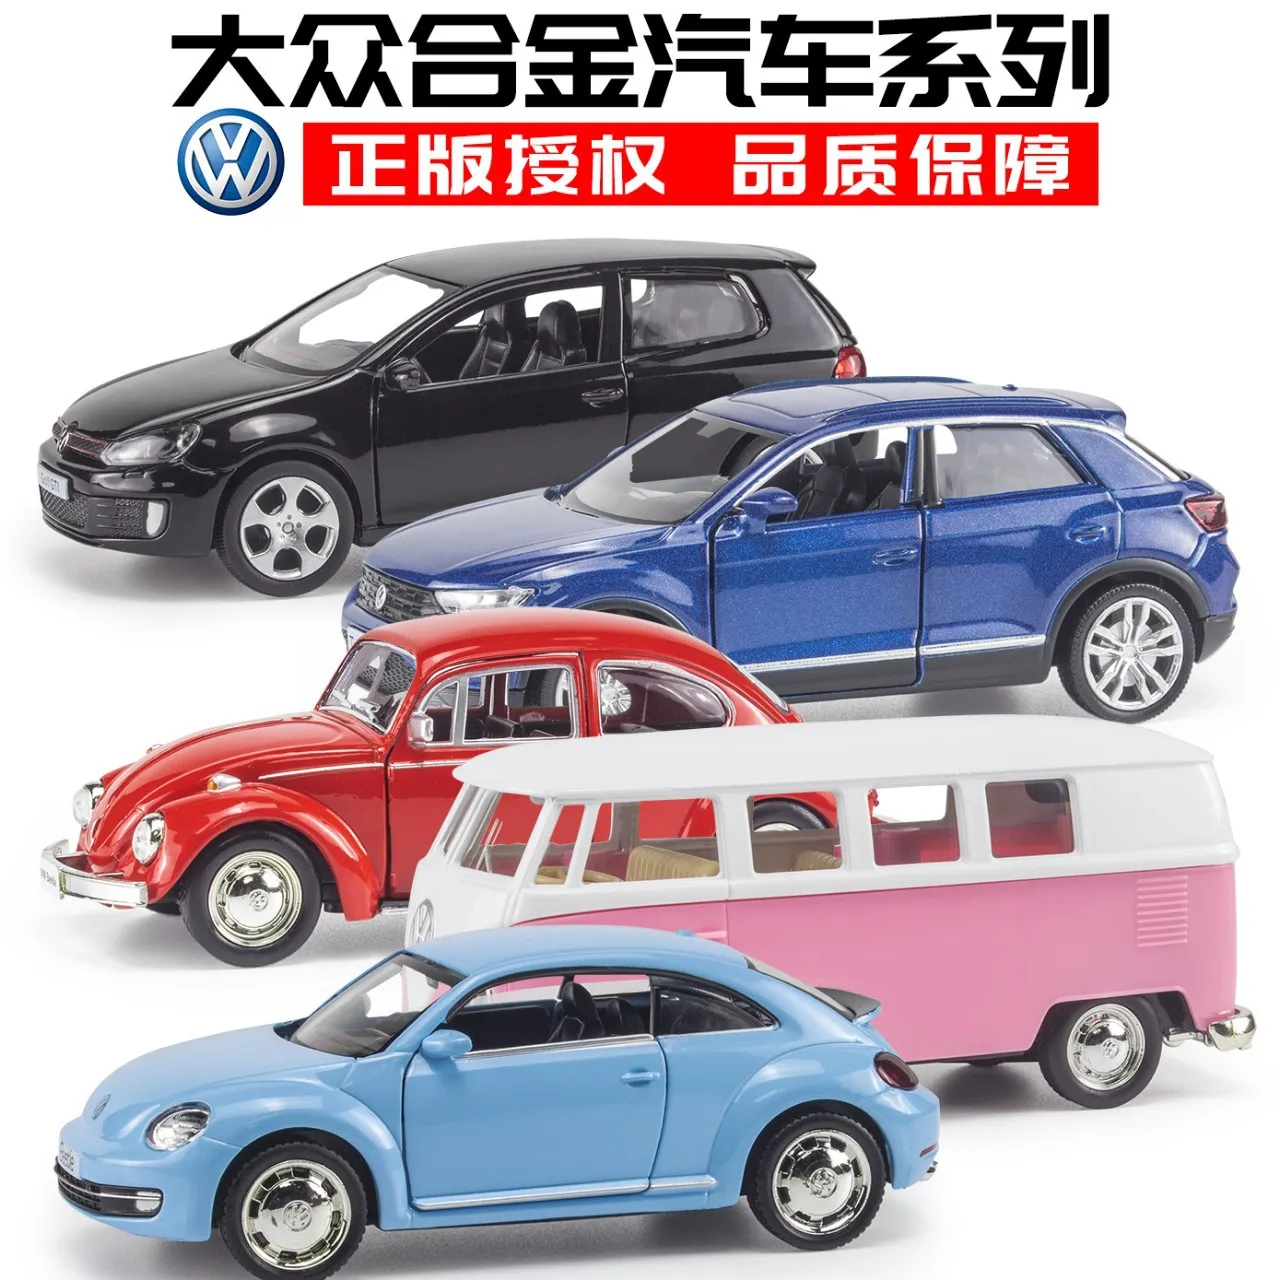 

New 1:36 Volkswagen Beetle T1 Bus Golf Exploration Model Simulation Pull Back Children's Alloy Car Model Toy Car Collection Gift